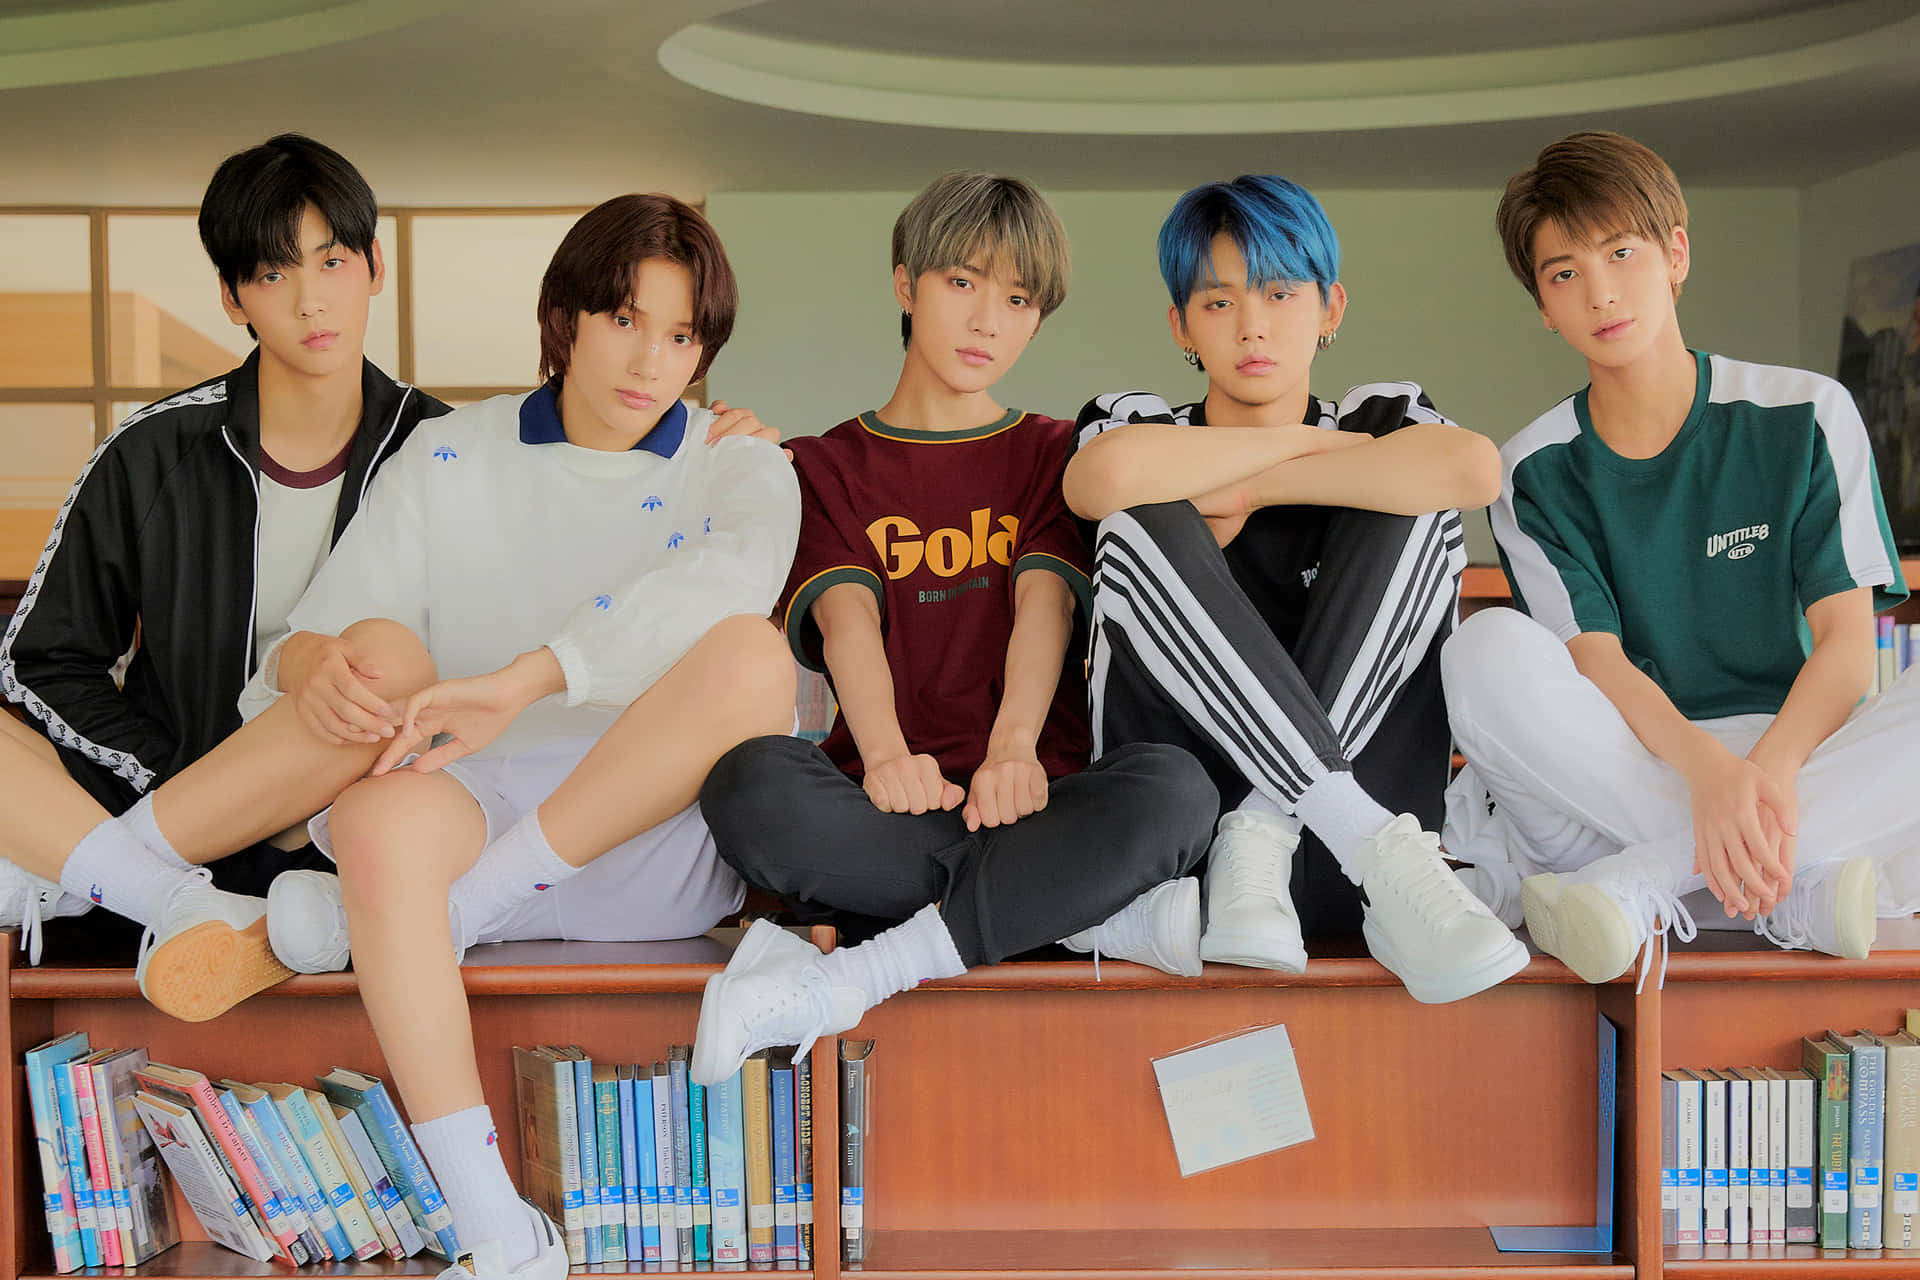 A Group Of Boys Sitting On A Shelf Wallpaper